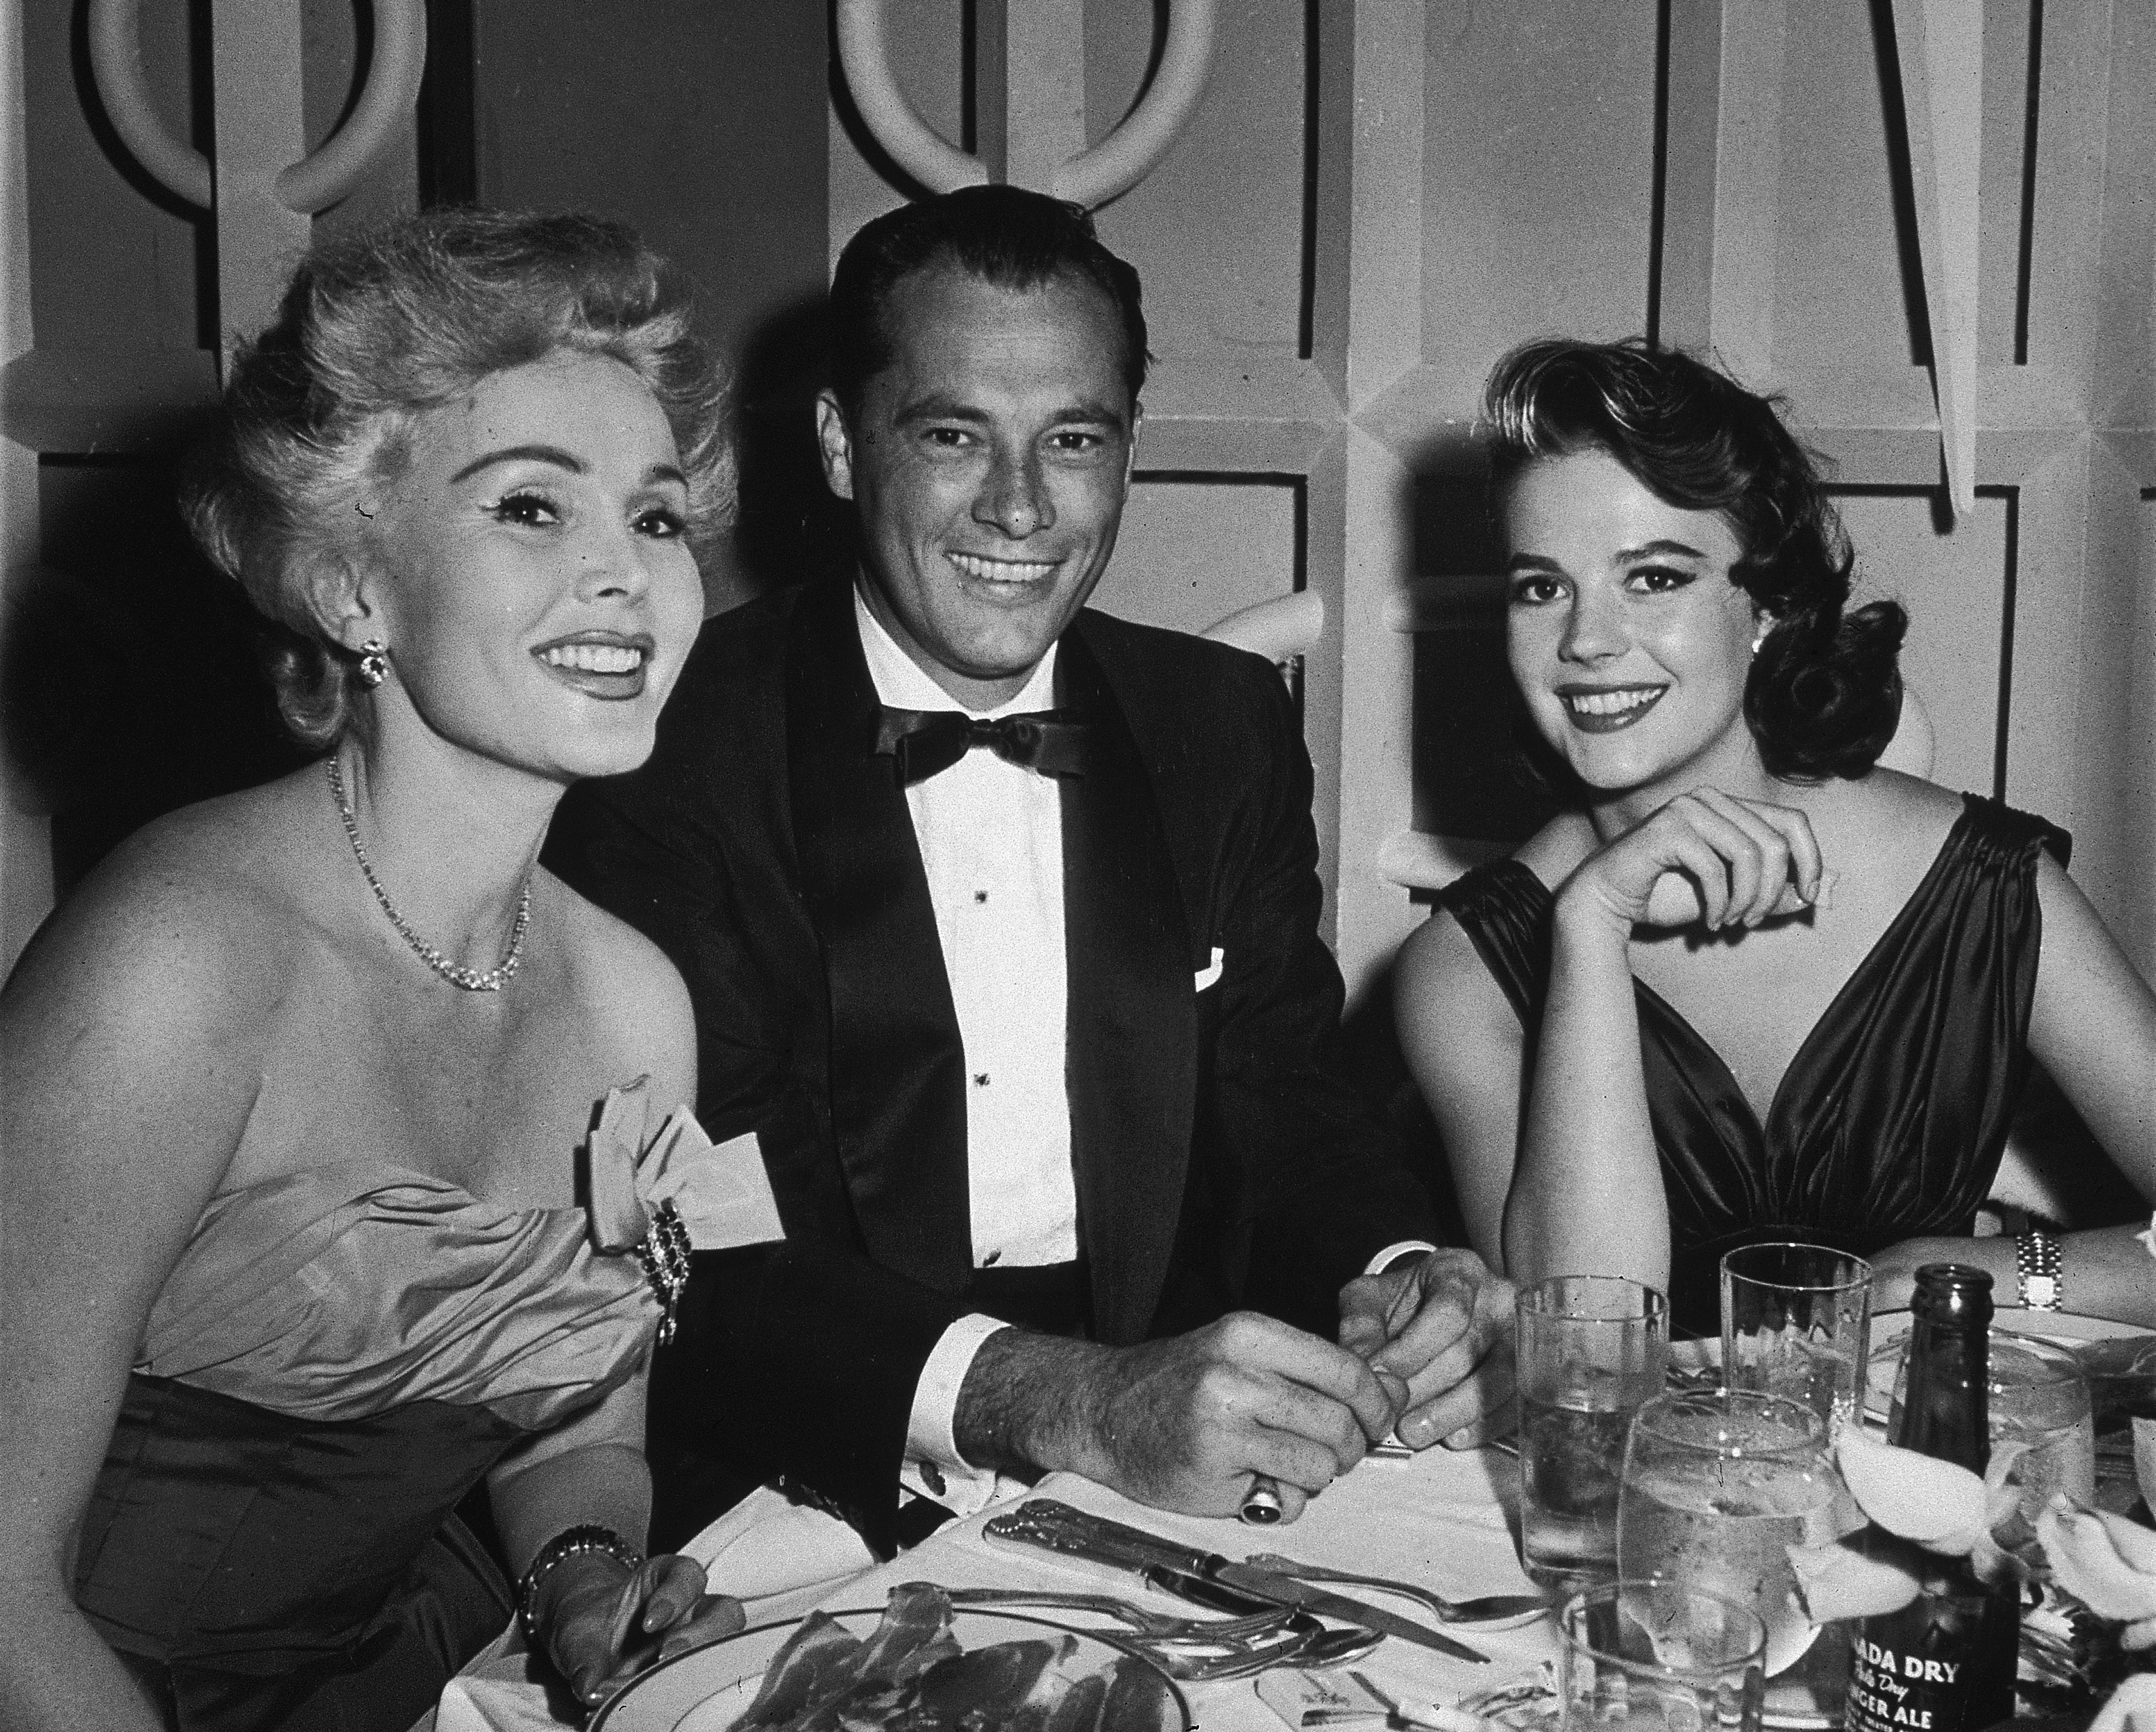 Zsa Zsa Gabor with her husband Conrad 'Nicky' Hilton, and actor Natalie Wood at Mike Romanoff's Restaurant on June, 13, 1957. | Source: Getty Images